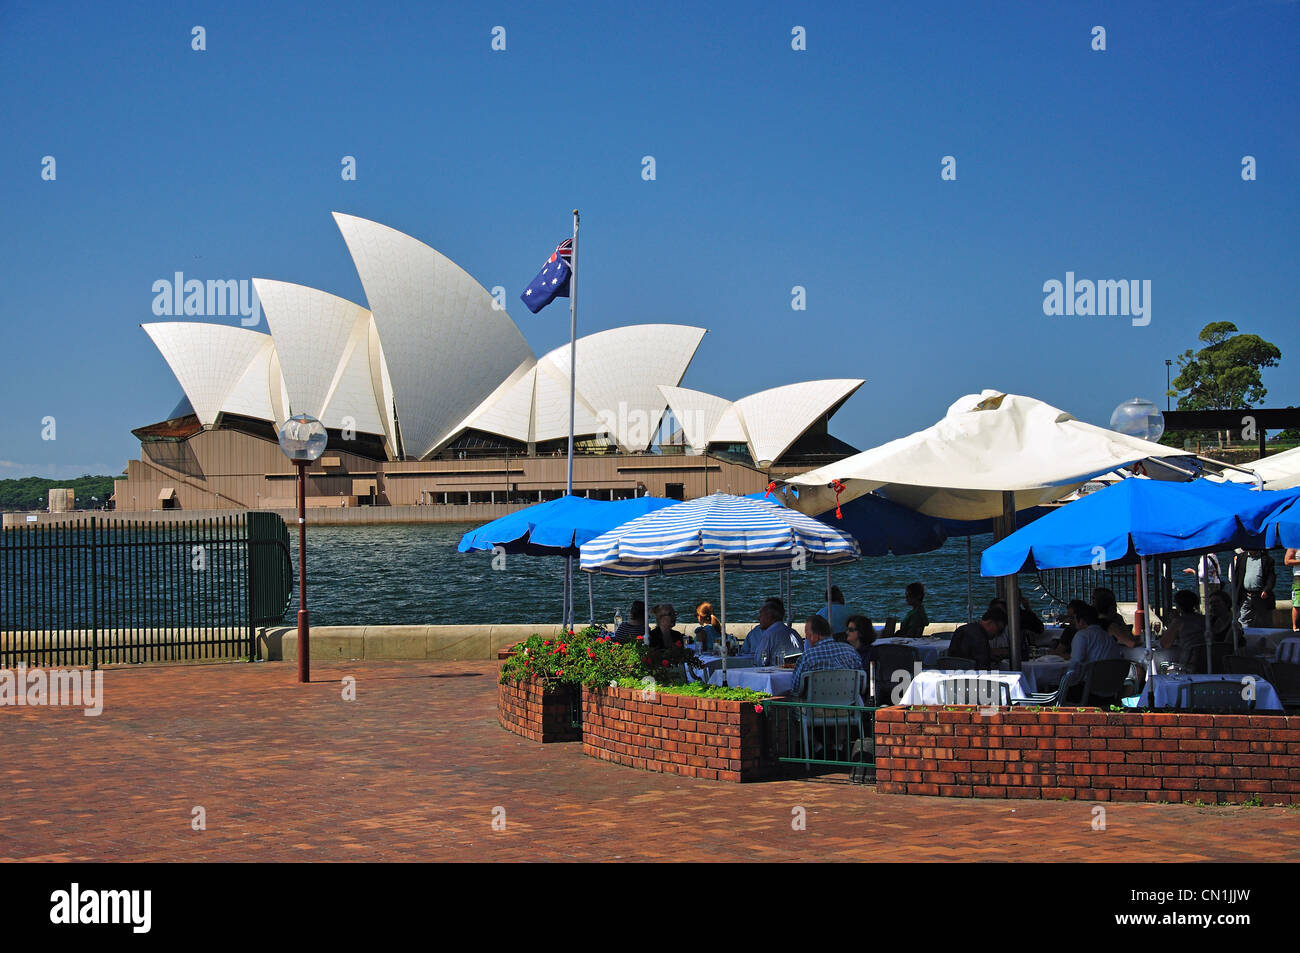 Peter Doyles at the Quay restaurant and Sydney Opera House, Bennelong Point, Sydney, New South Wales, Australia Stock Photo